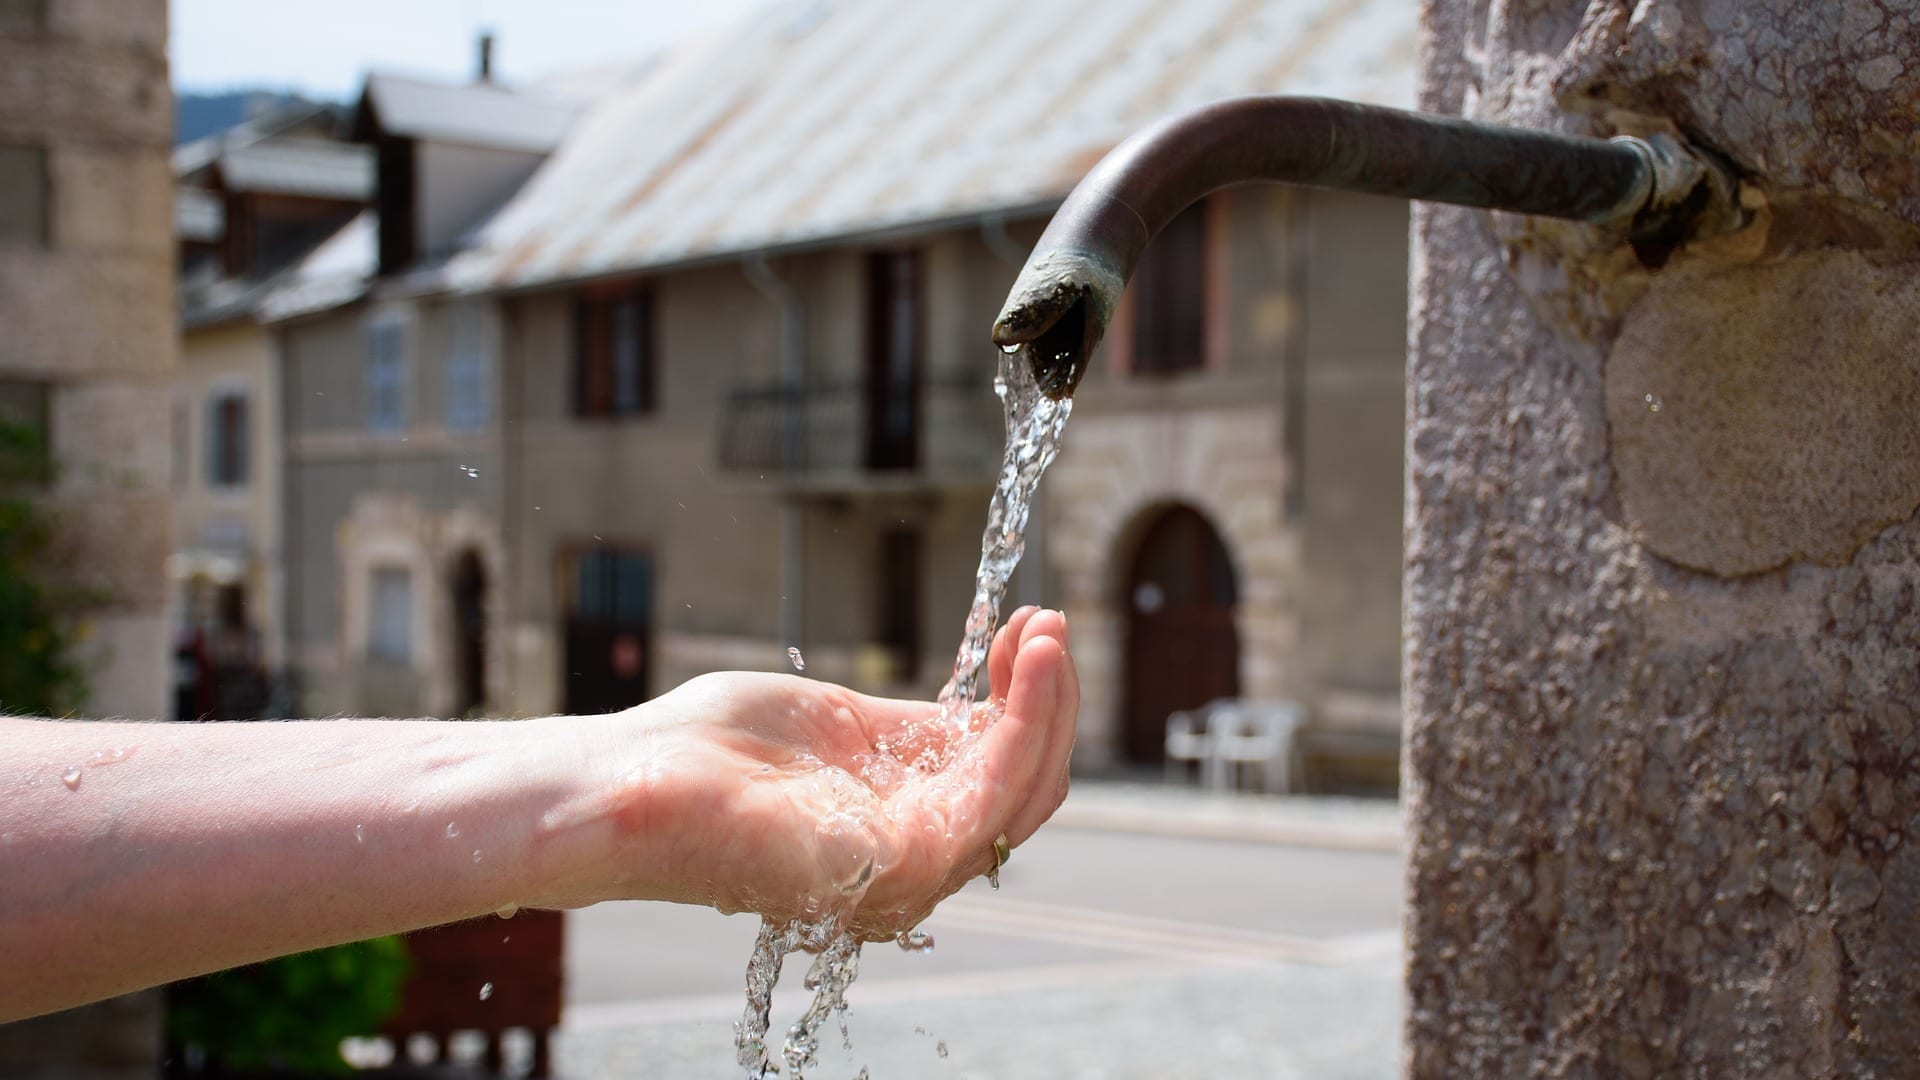 Water flowing from tap to hand; image courtesy cripi www.pixabay.com via CC0.